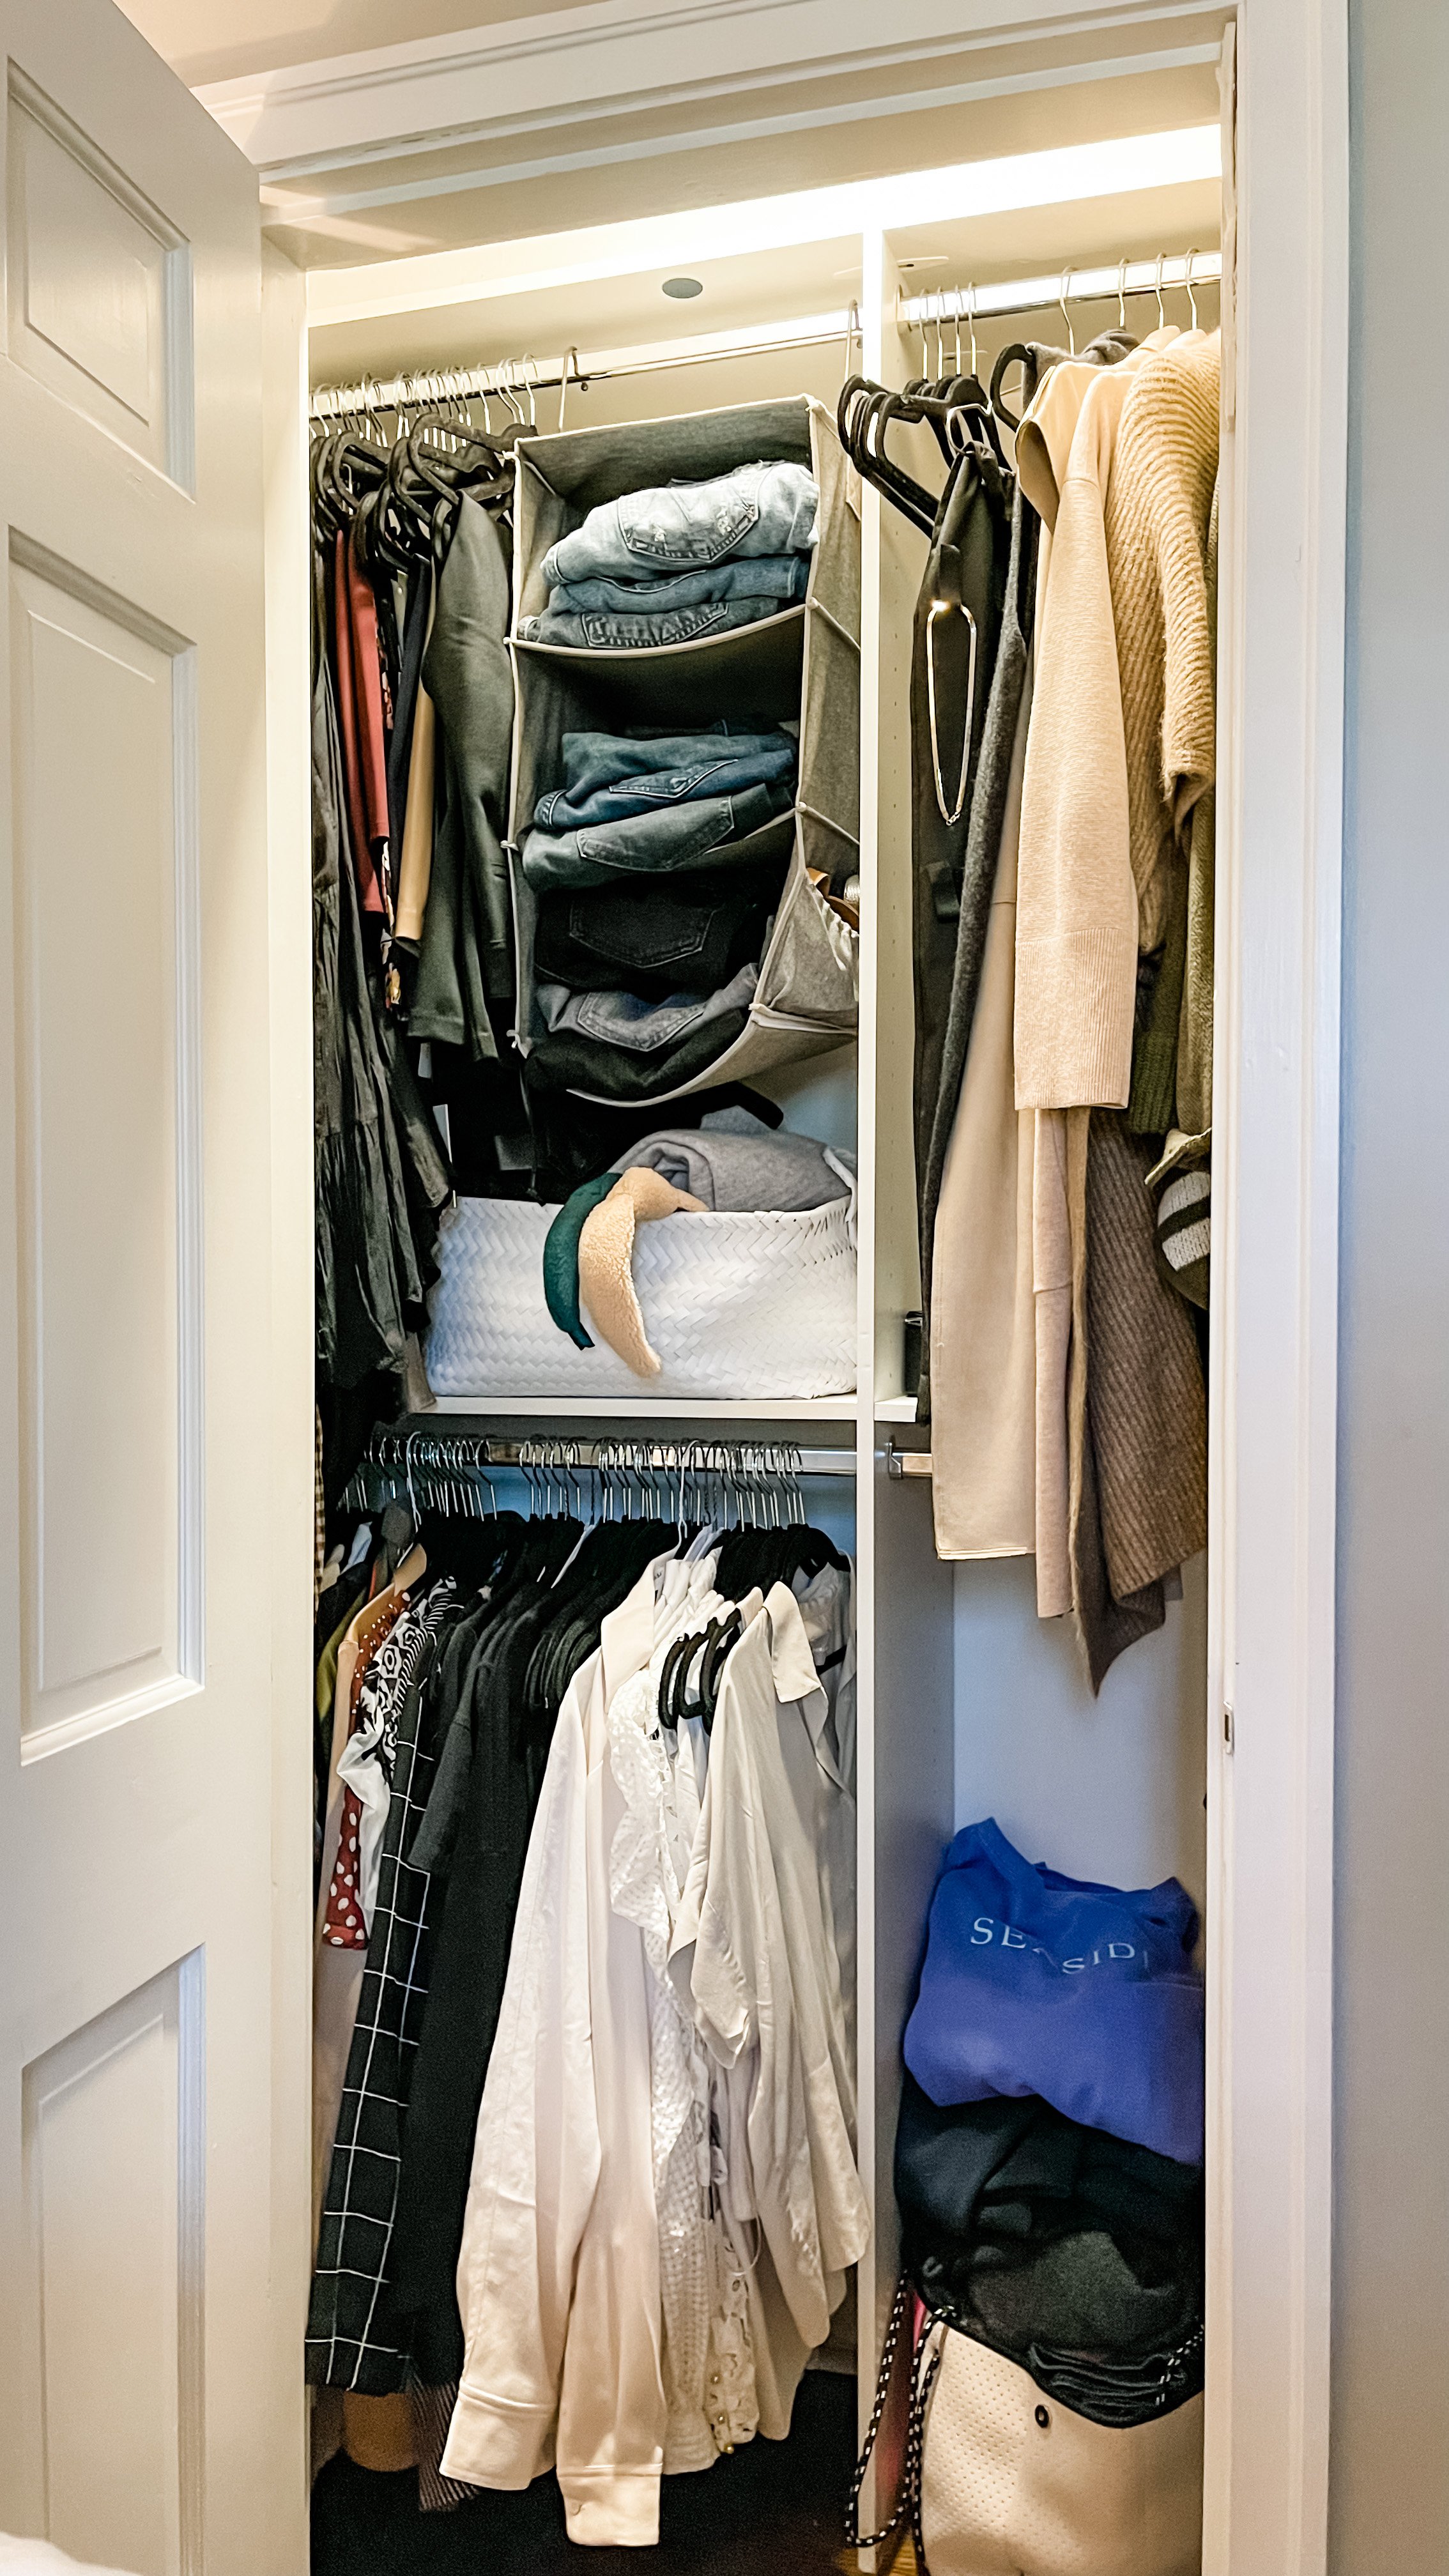 How to Maximize Space in a Small Closet